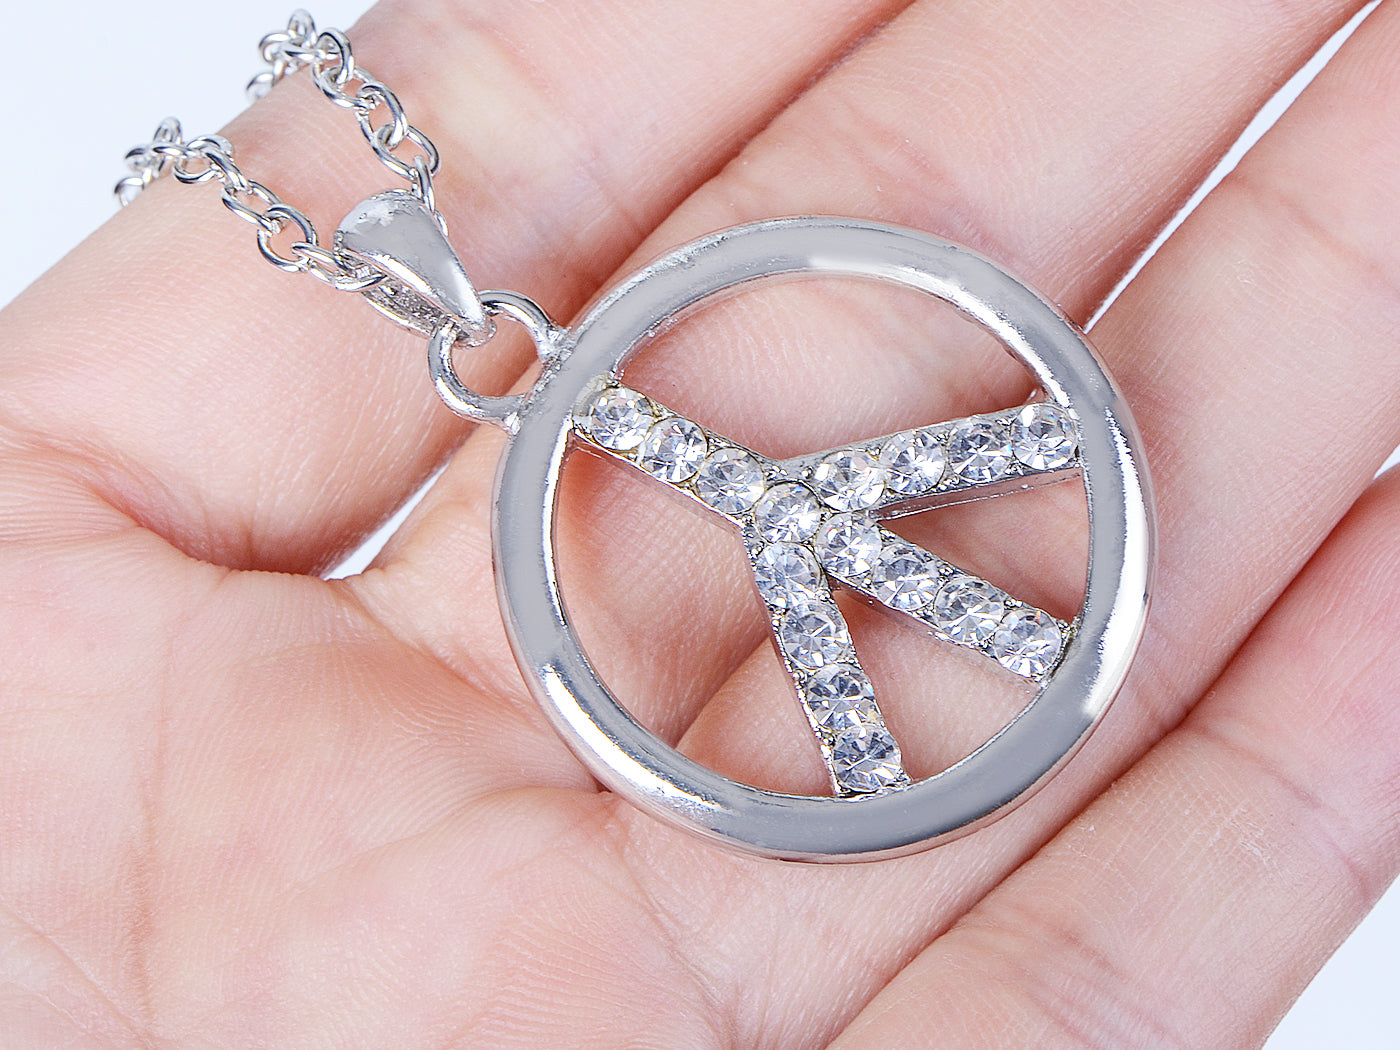 Able Peace Sign Retro Necklace